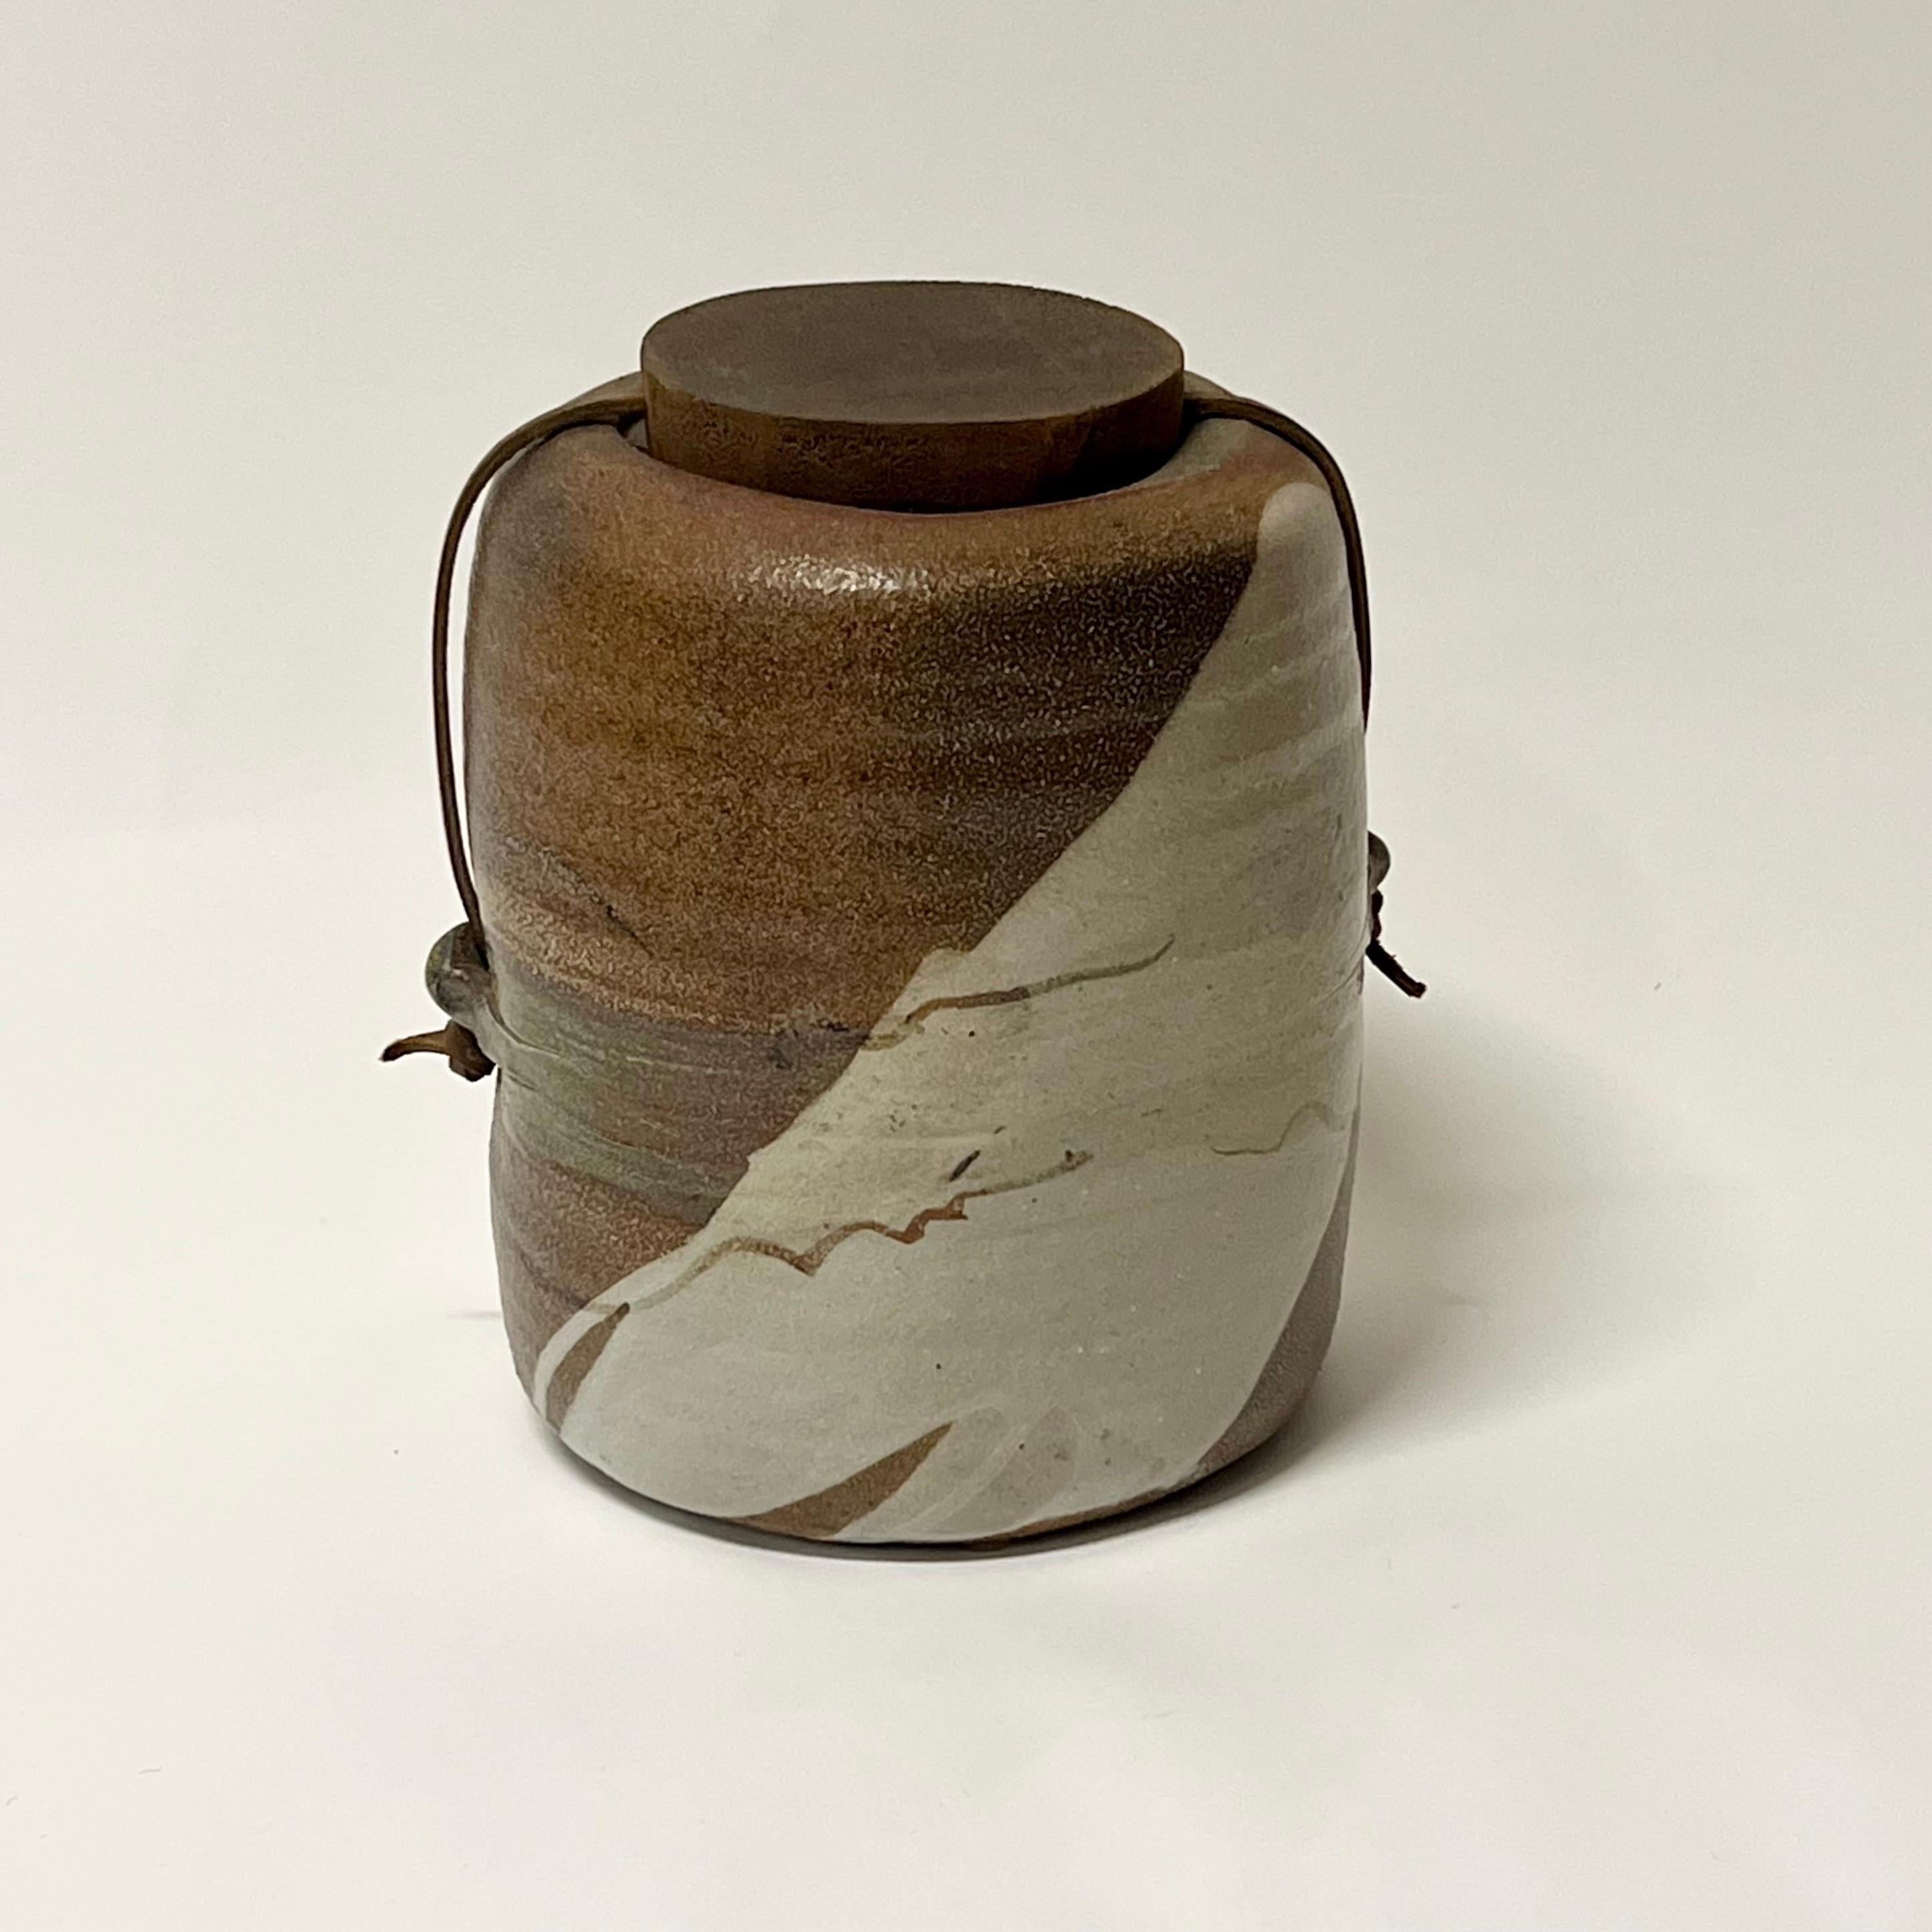 Amazing salt-fired lidded vessel by well listed potter, Sandra Johnstone circa 1970s. Johnstone (1936-1991) studied with Peter Voulkos at UC Berkeley in the 1950s. In addition Johnstone also studied with Paul Soldner. She eventually went on to build